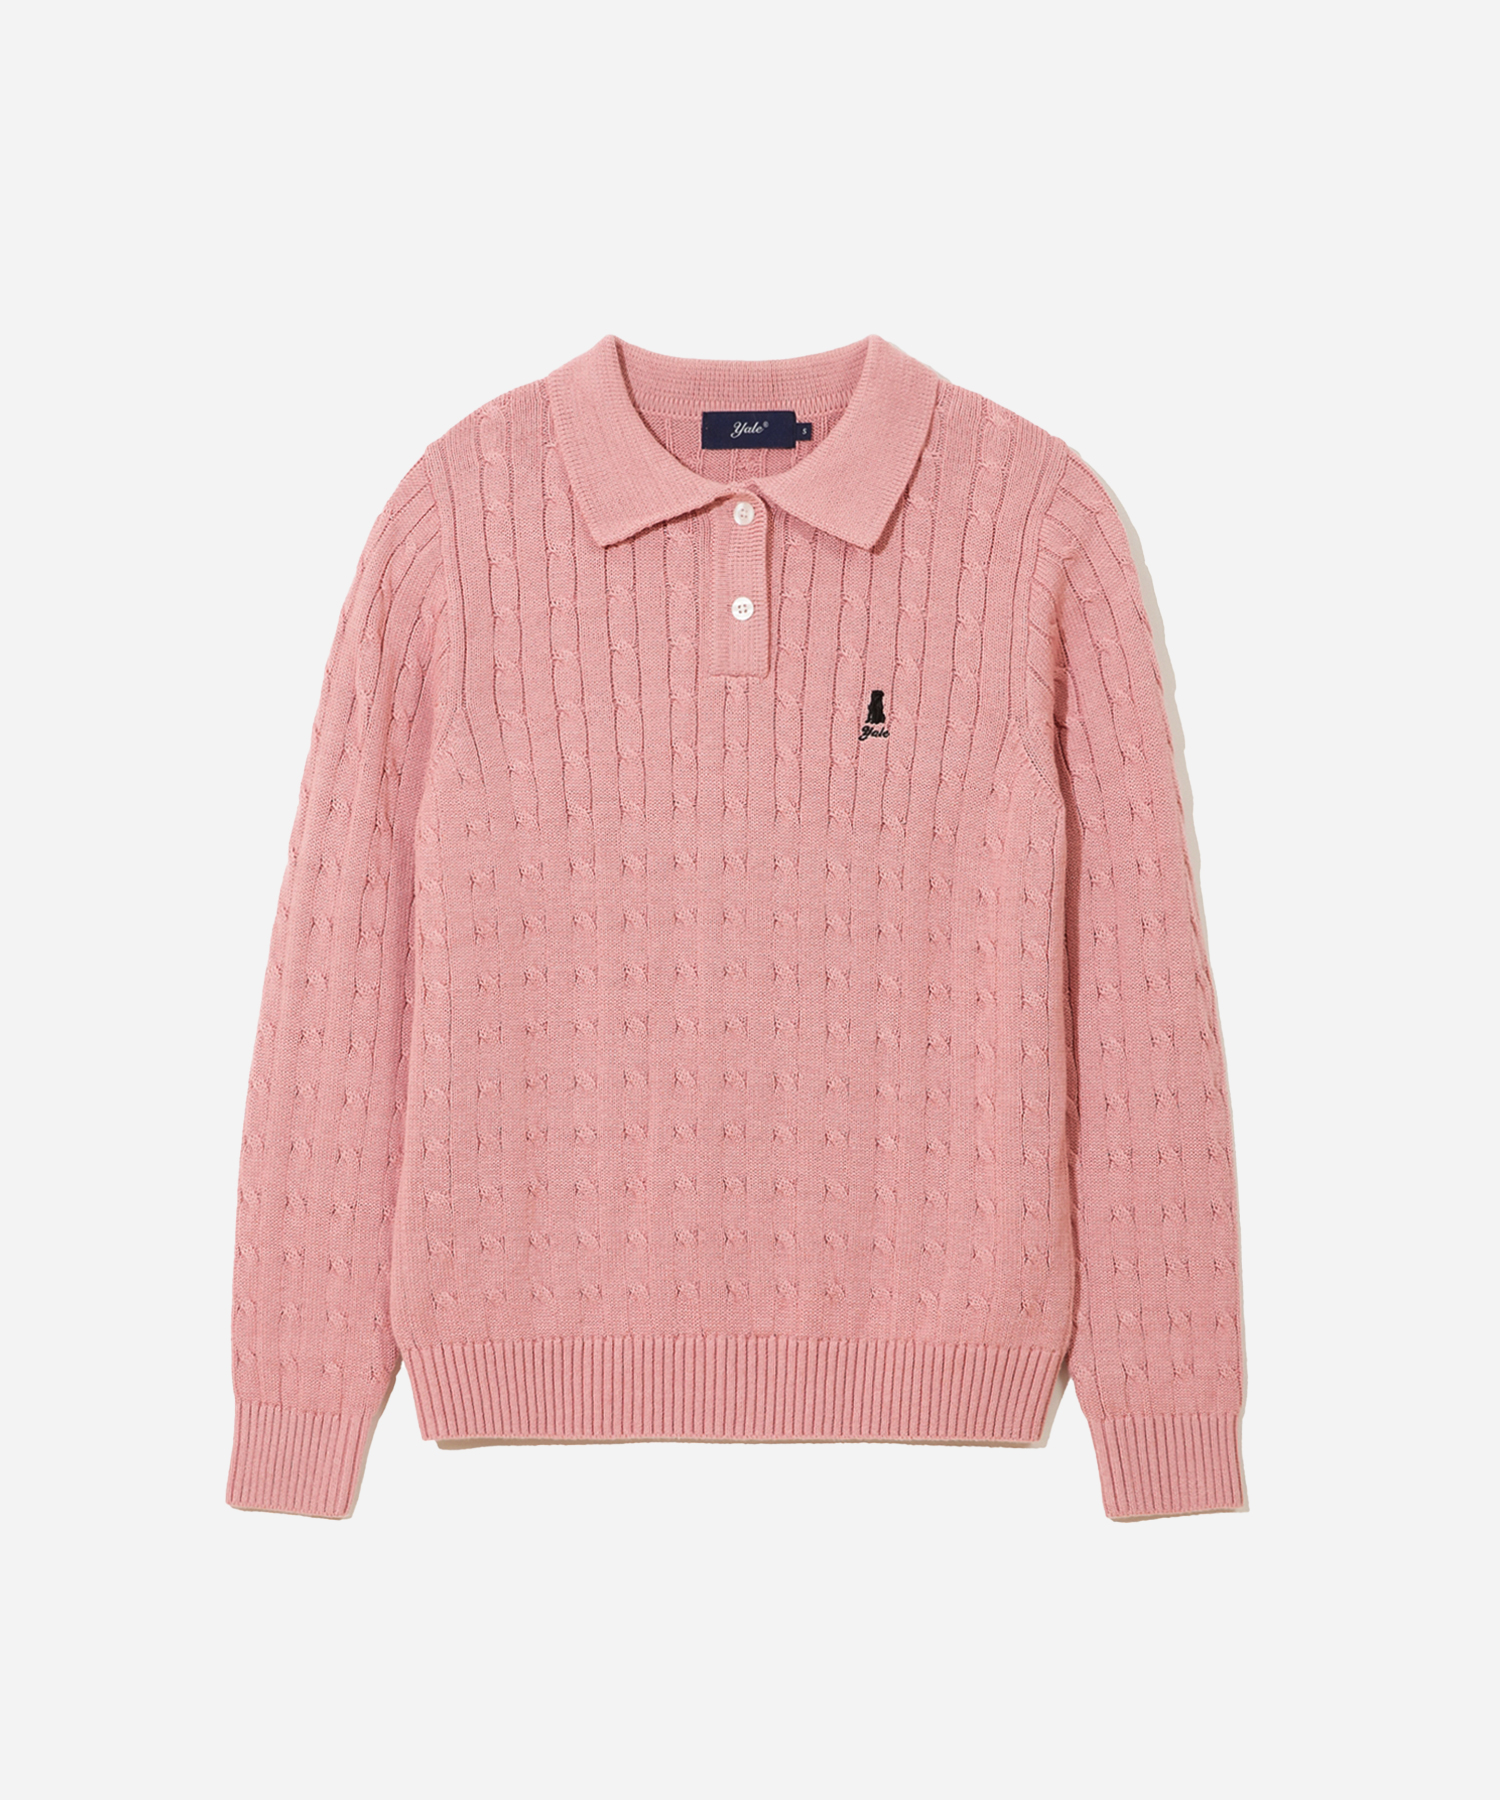 WOMEN HERITAGE DAN CABLE PK KNIT HEATHER PINK